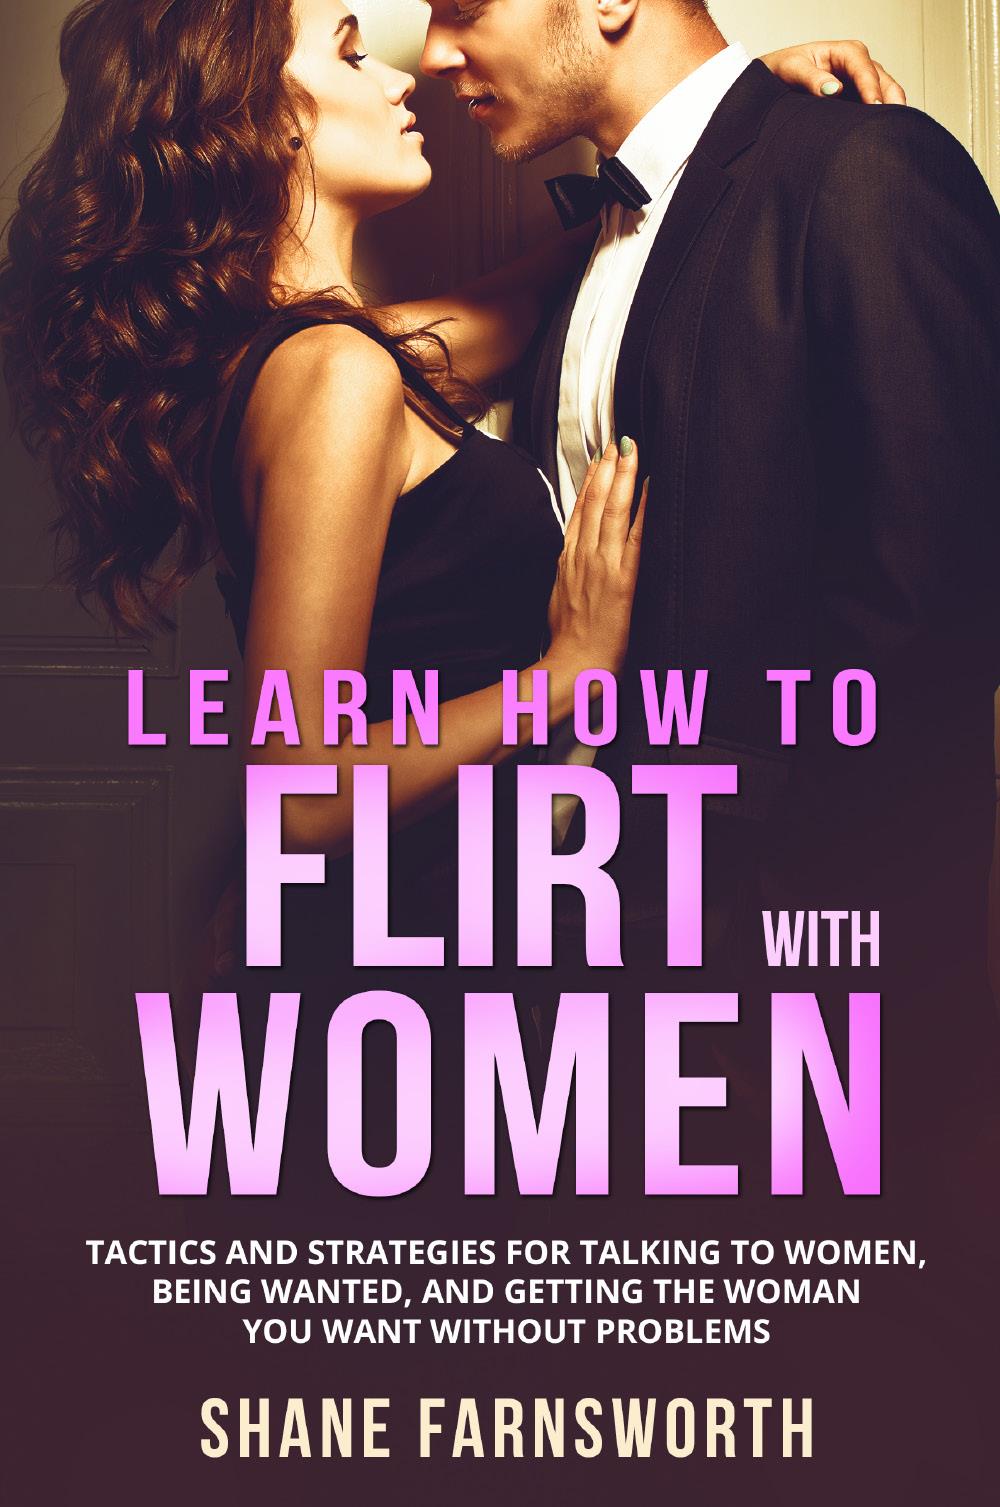 How to flirt with women. Tactics and strategies for talking to women, being wanted, and getting the woman you want without problems.